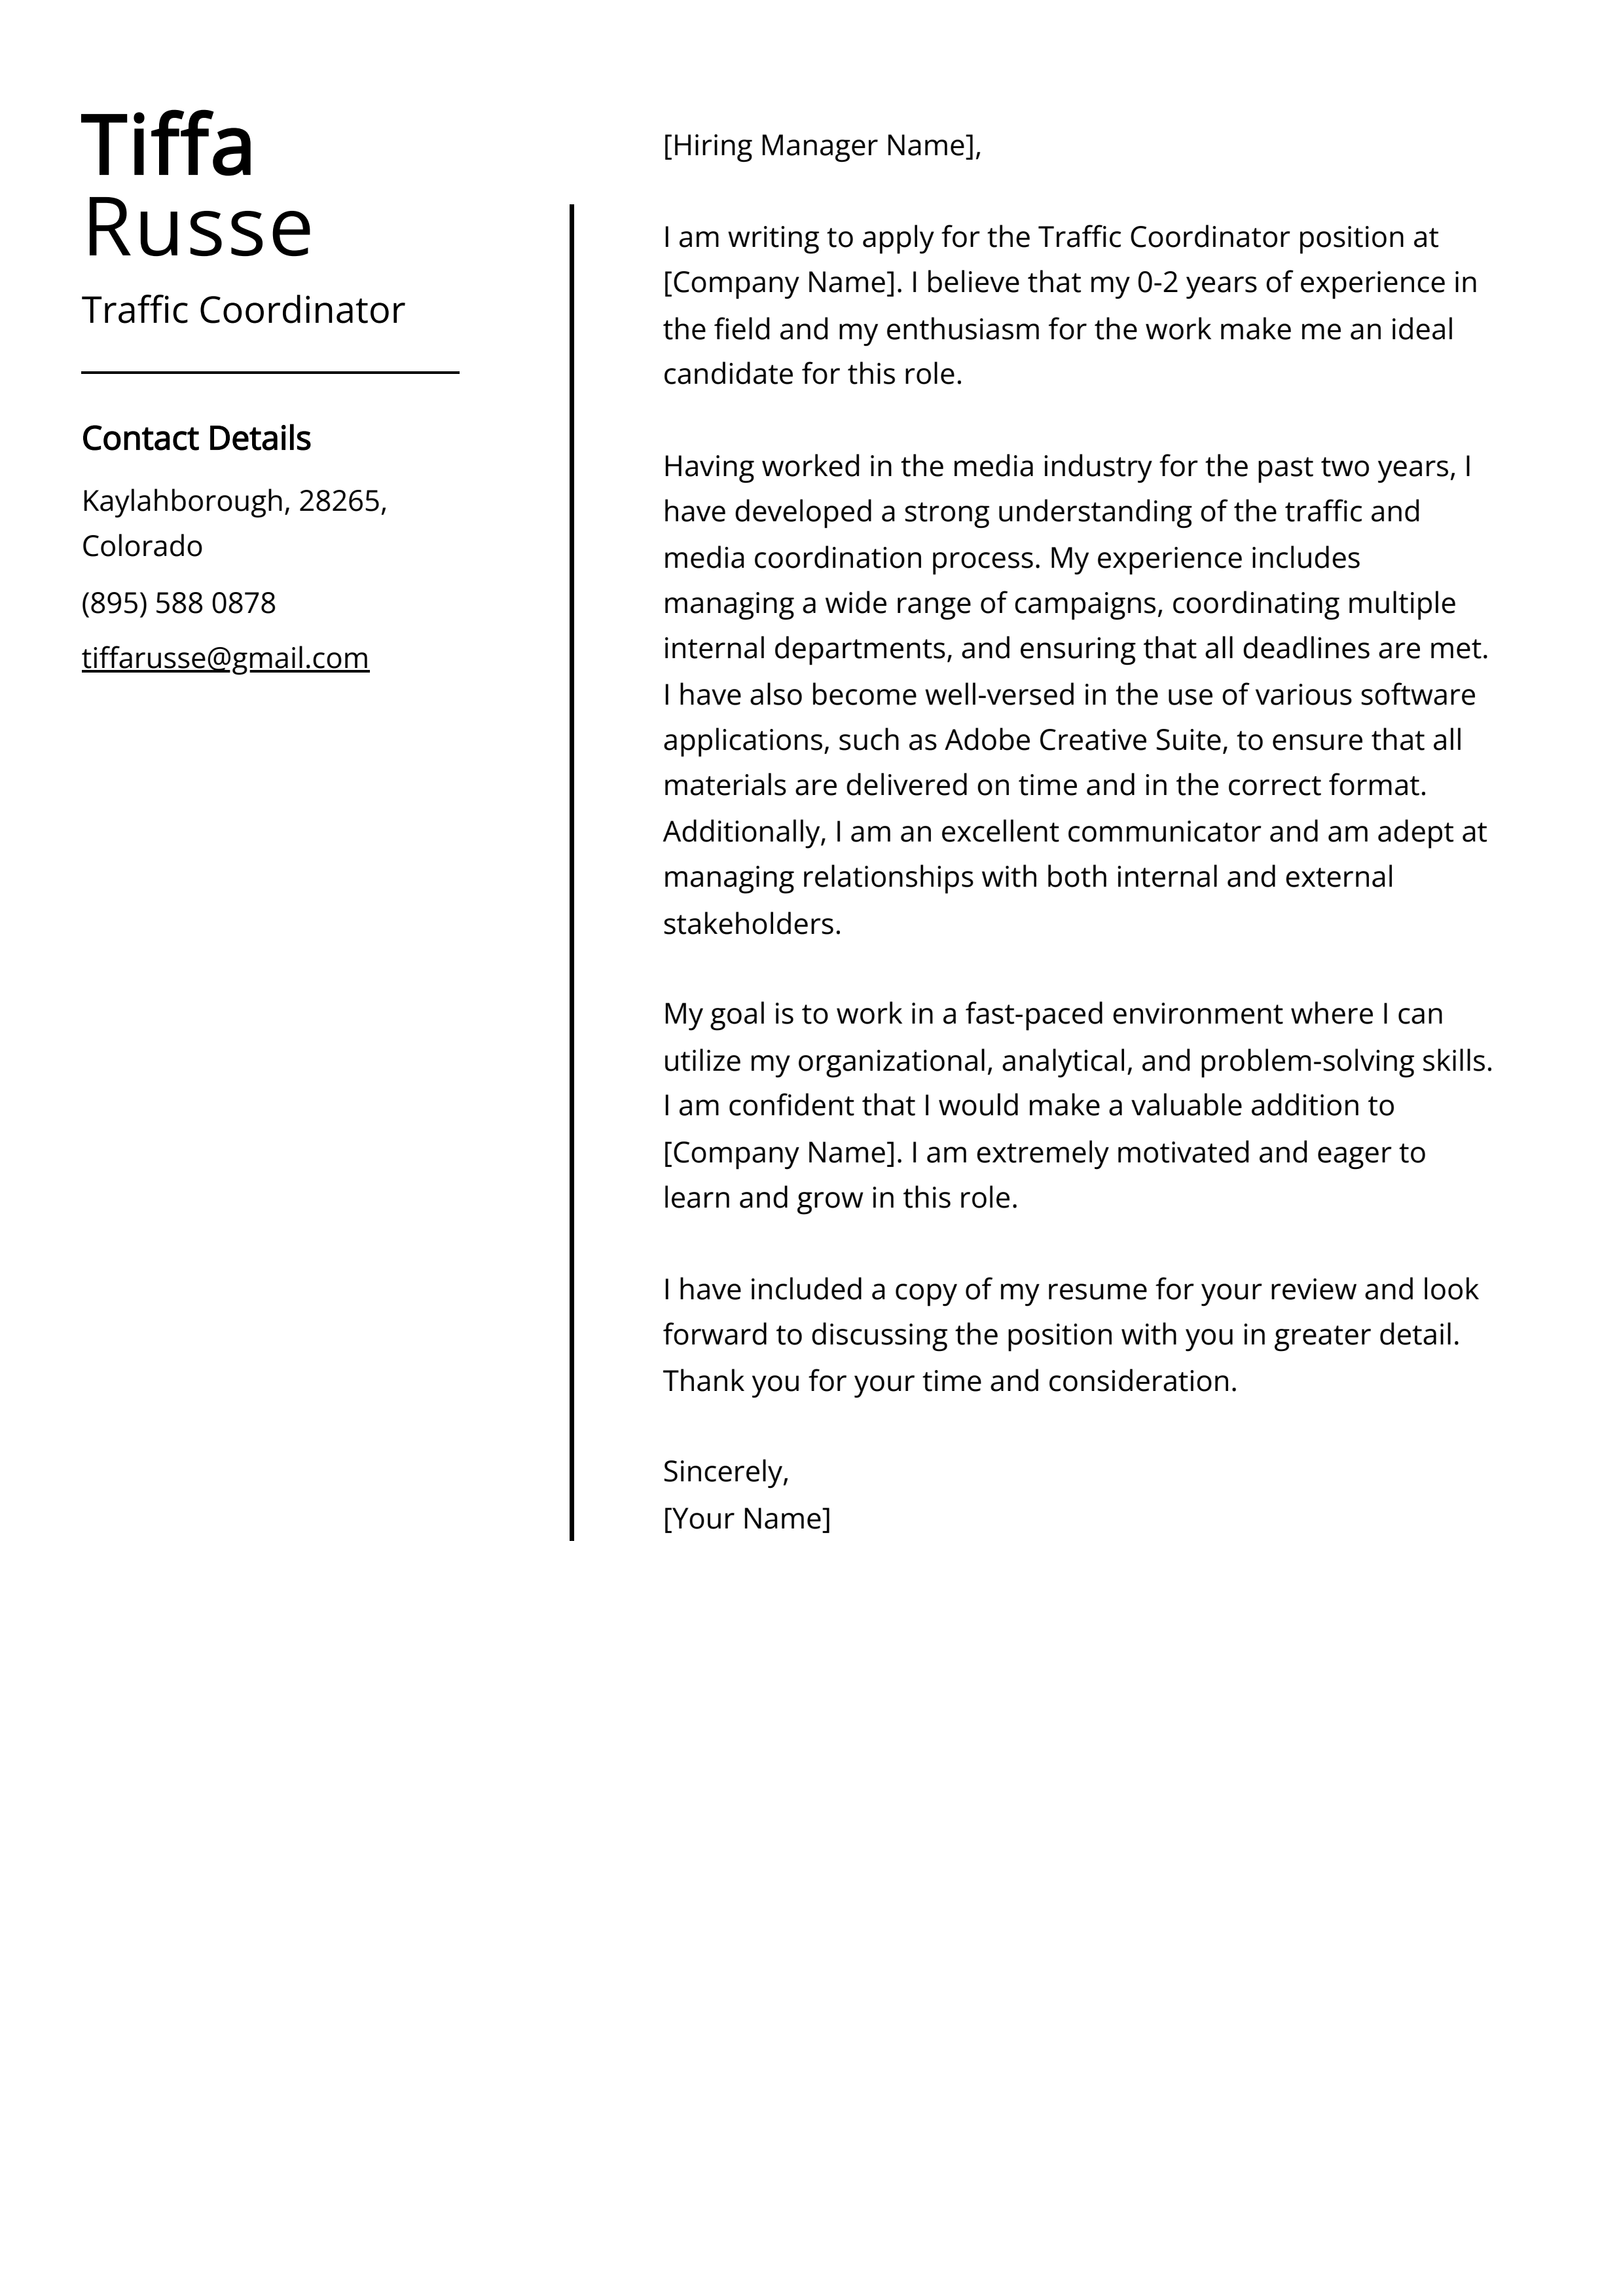 Traffic Coordinator Cover Letter Example